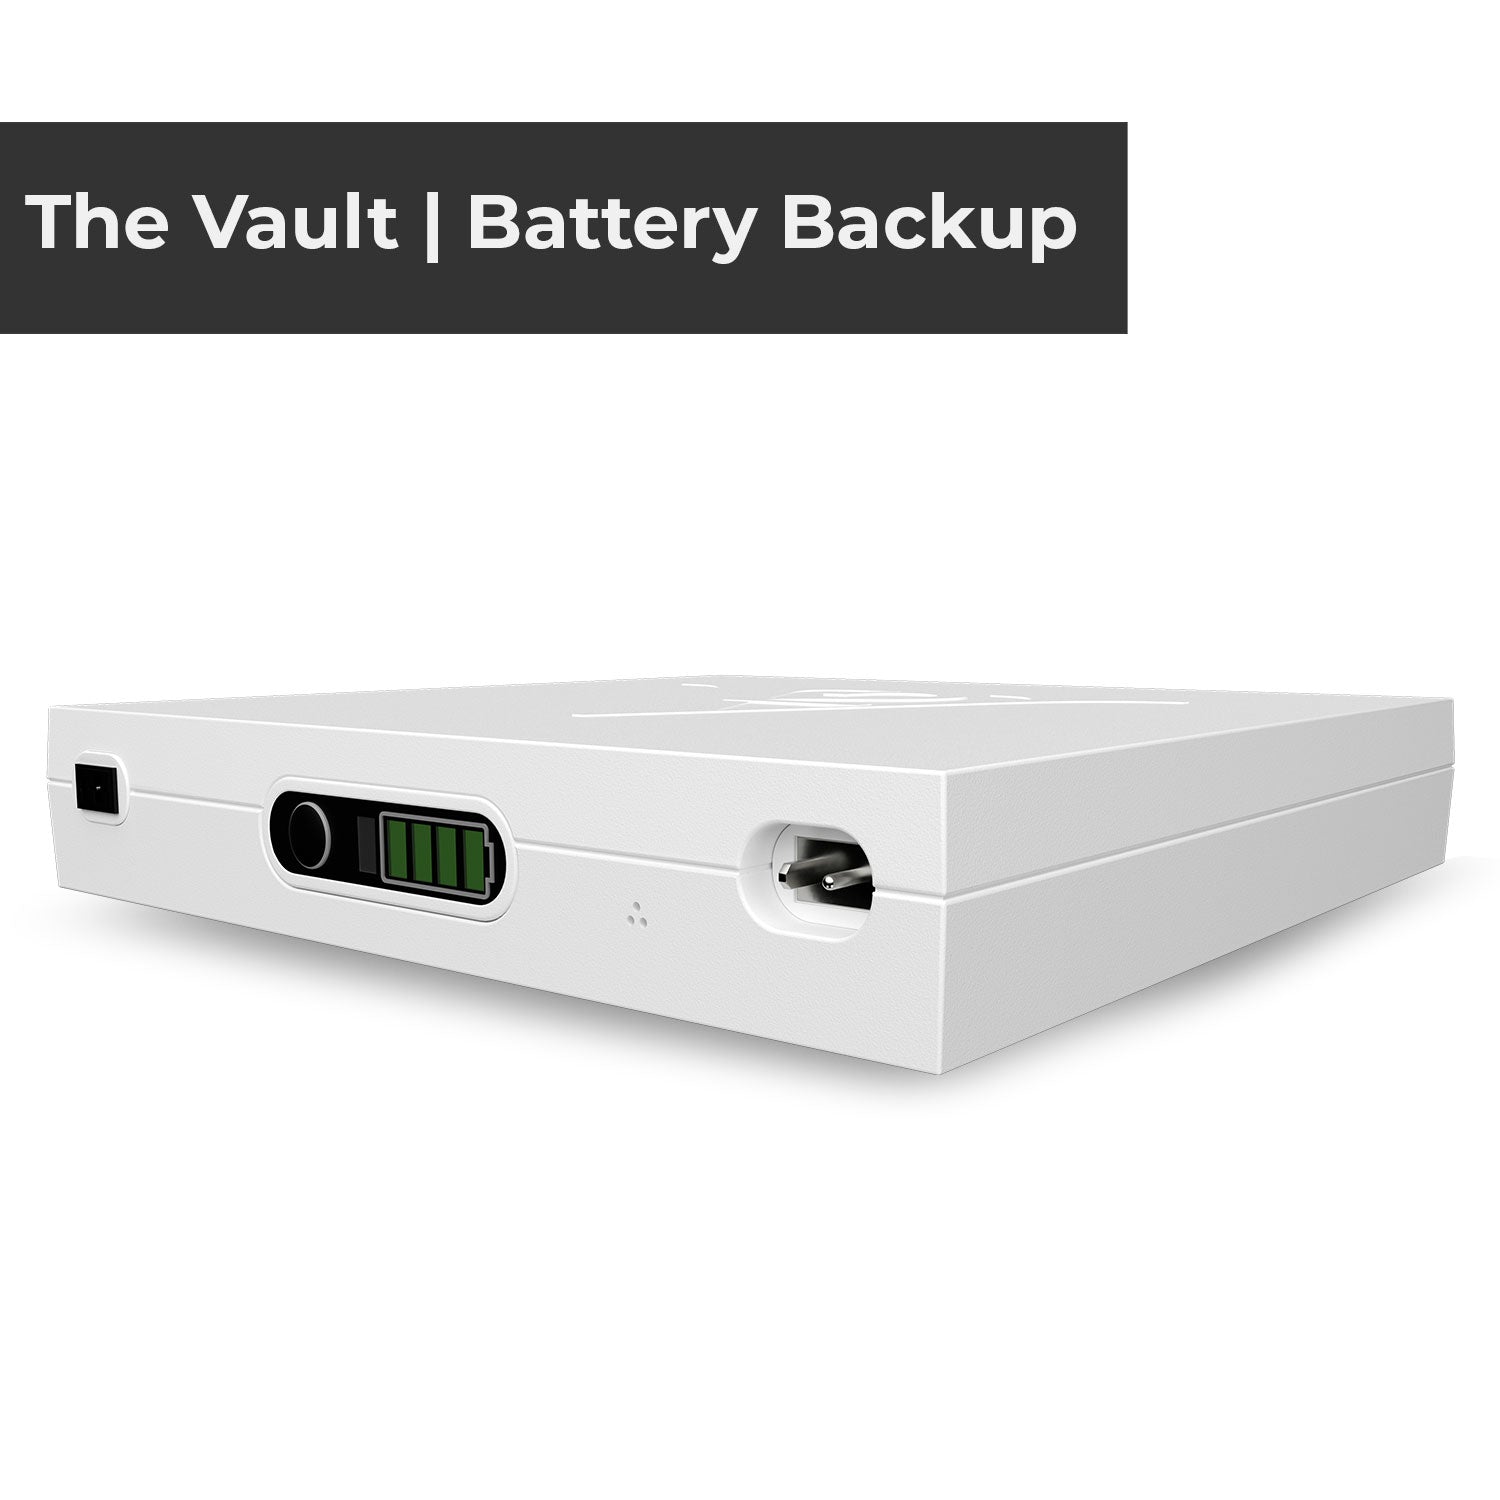 The Vault Battery Backup - Uninterrupted power for your adjustable bed